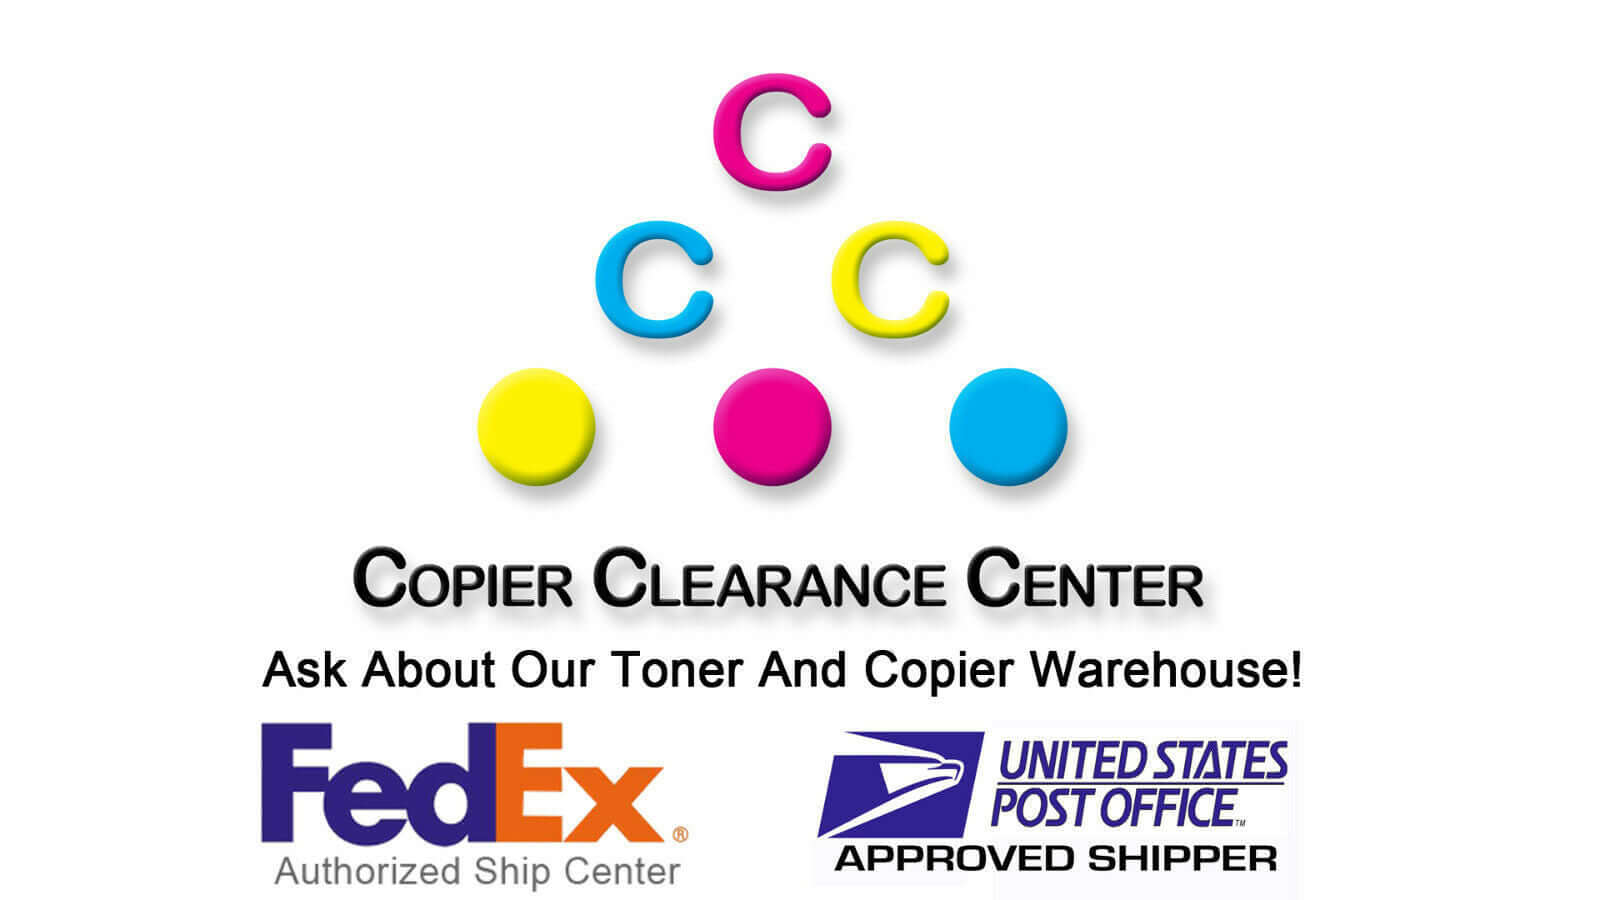 ORIGINAL CANON MISC. MAINTENANCE PARTS FOR MULTIDECK-B1 FEDEX TWO DAY SHIPPING! - copier-clearance-center